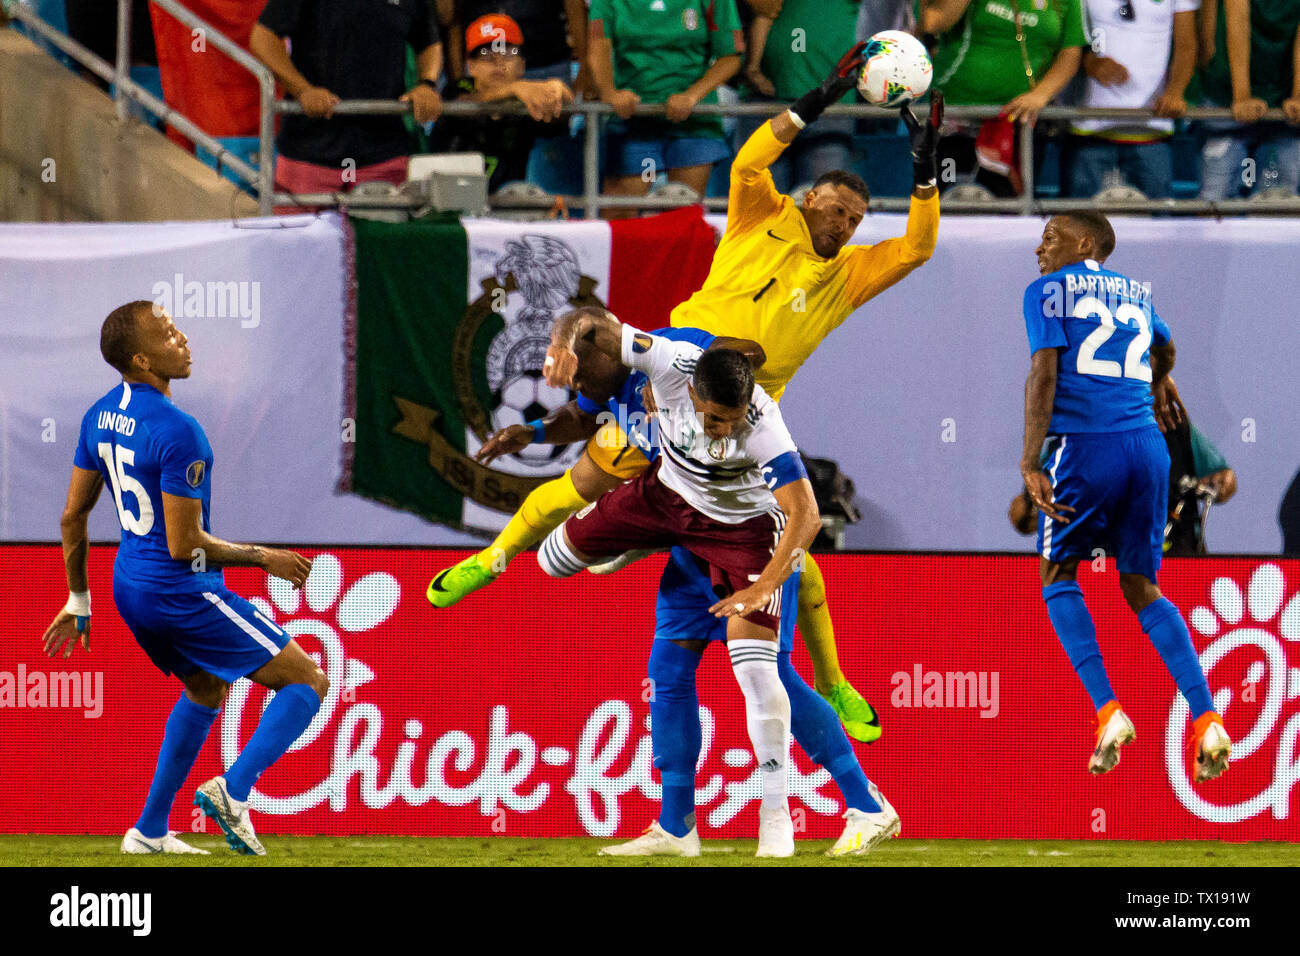 Charlotte, NC, USA. 23rd June, 2019. Martinique goalkeeper Loic Chauvet (1) grabs the ball over top of Mexico midfielder Andres Guardado (3) in the 2019 Gold Cup match at Bank of America Stadium in Charlotte, NC. (Scott Kinser) Credit: csm/Alamy Live News Stock Photo